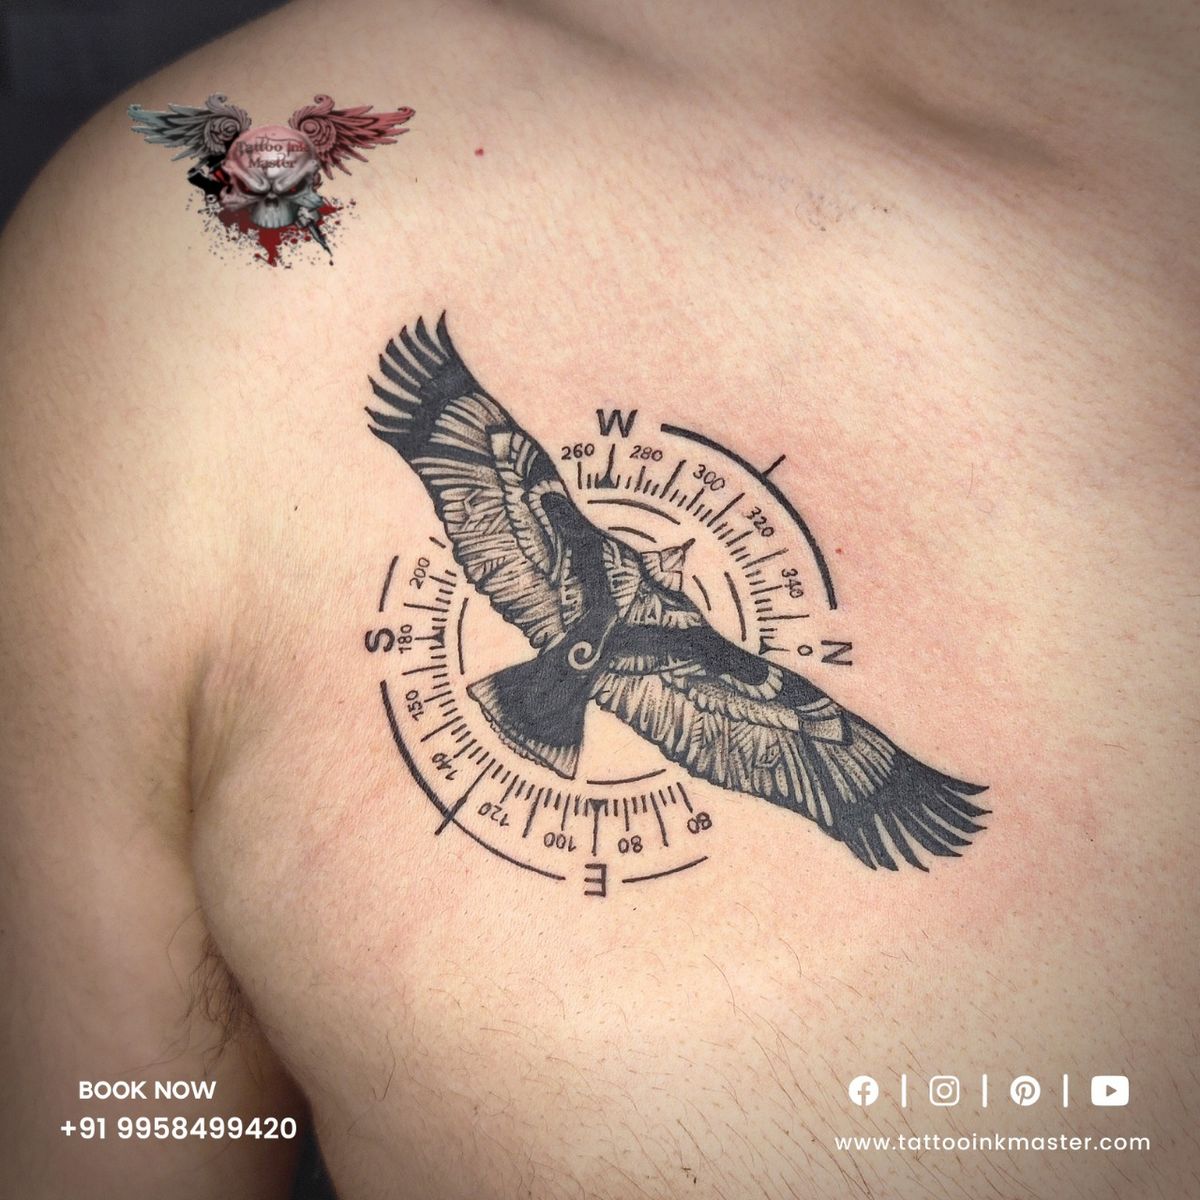 Travelers Symbolic Direction and Eagle Tattoo | Tattoo Ink Master